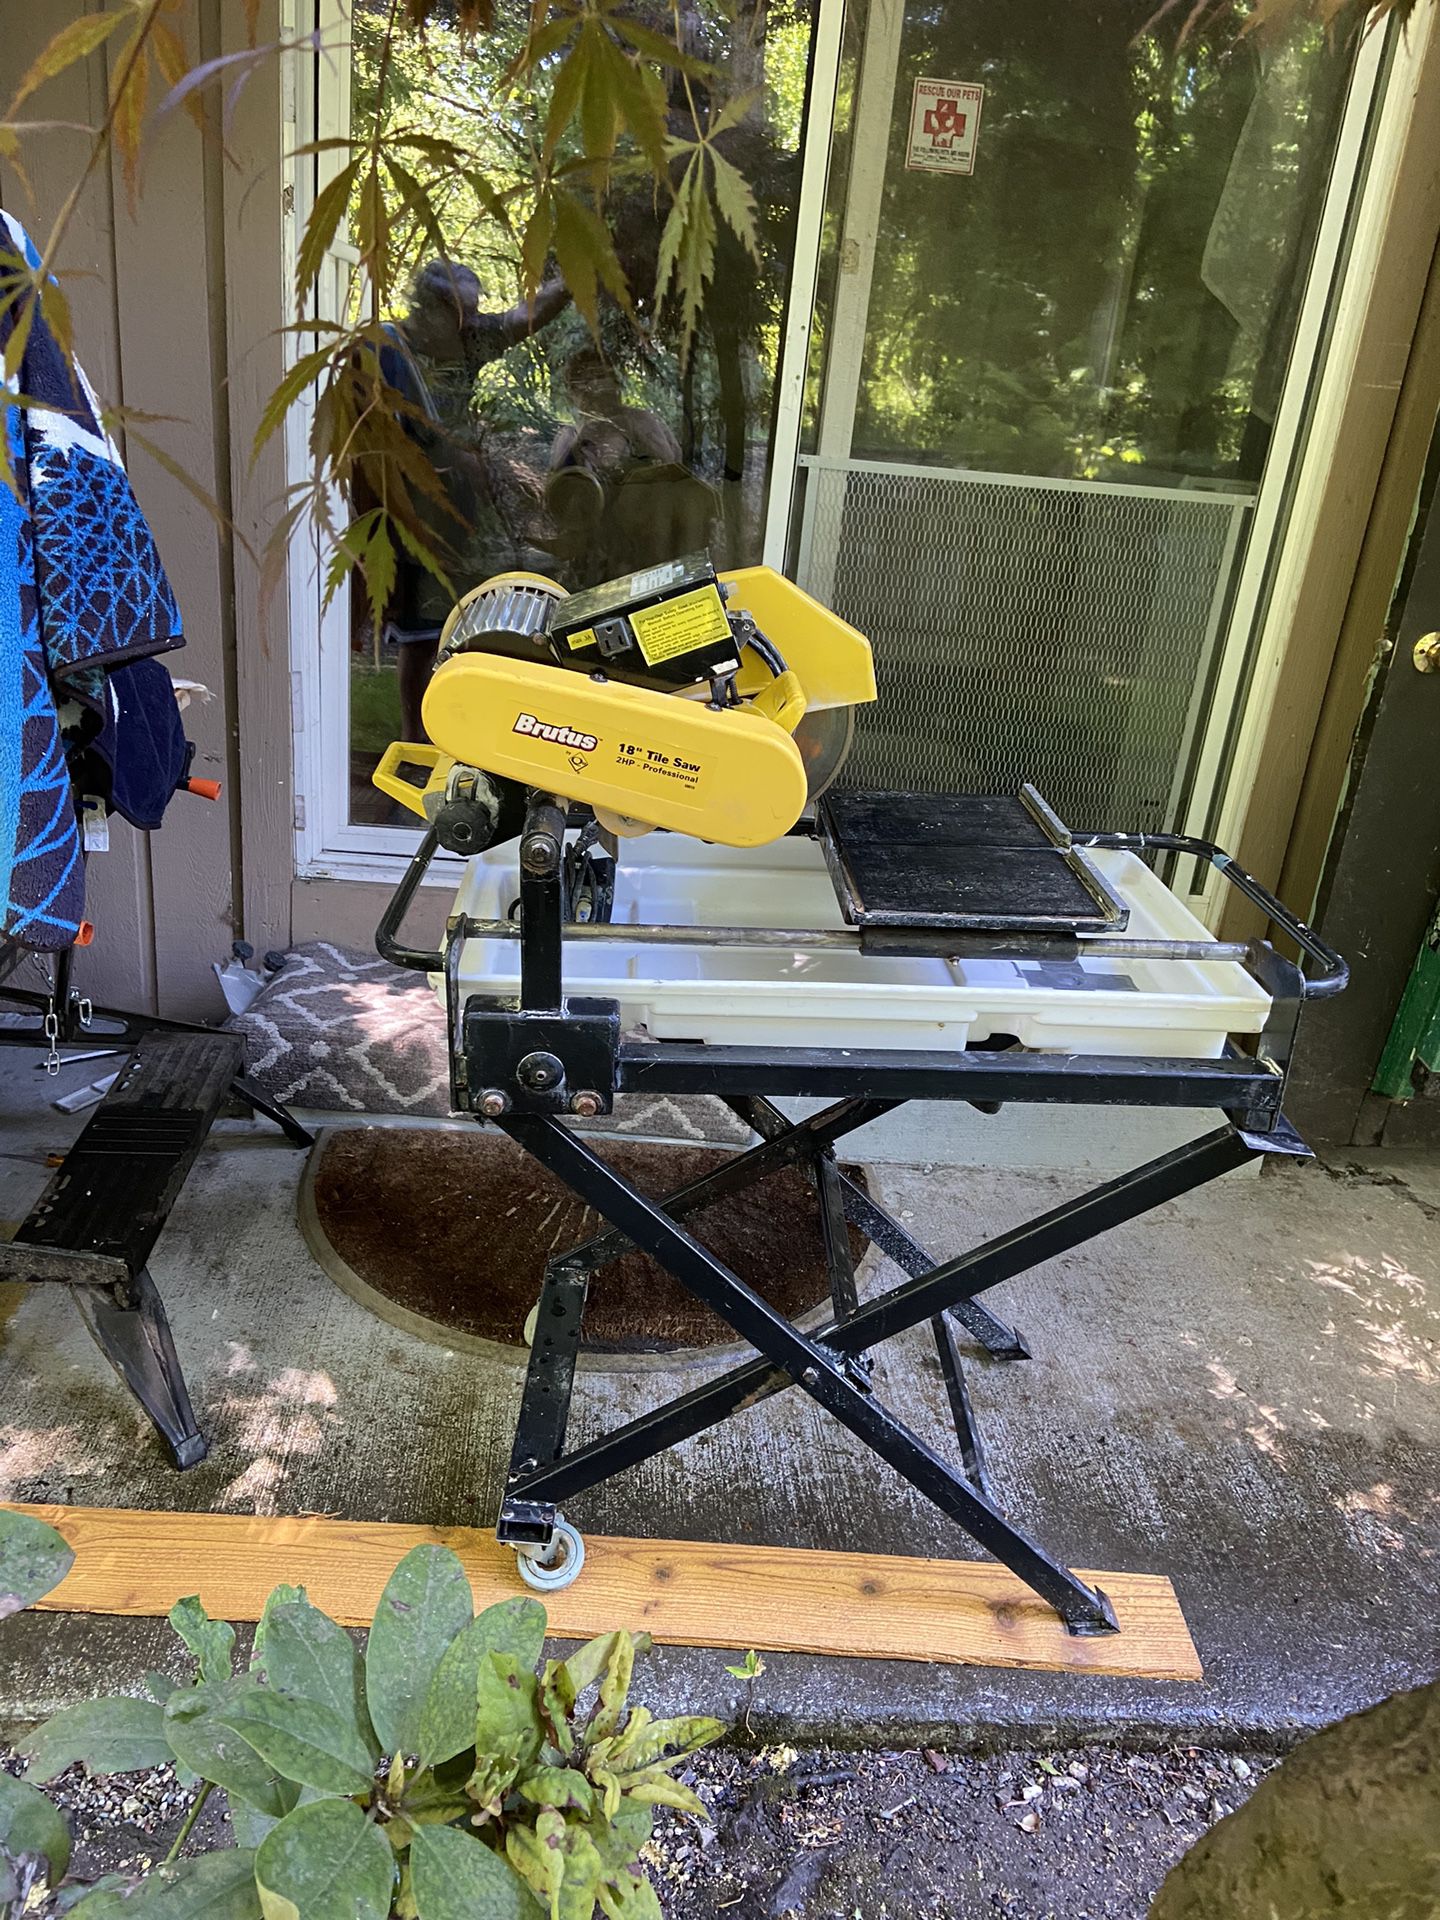 Tile cutter $150 Still Available 